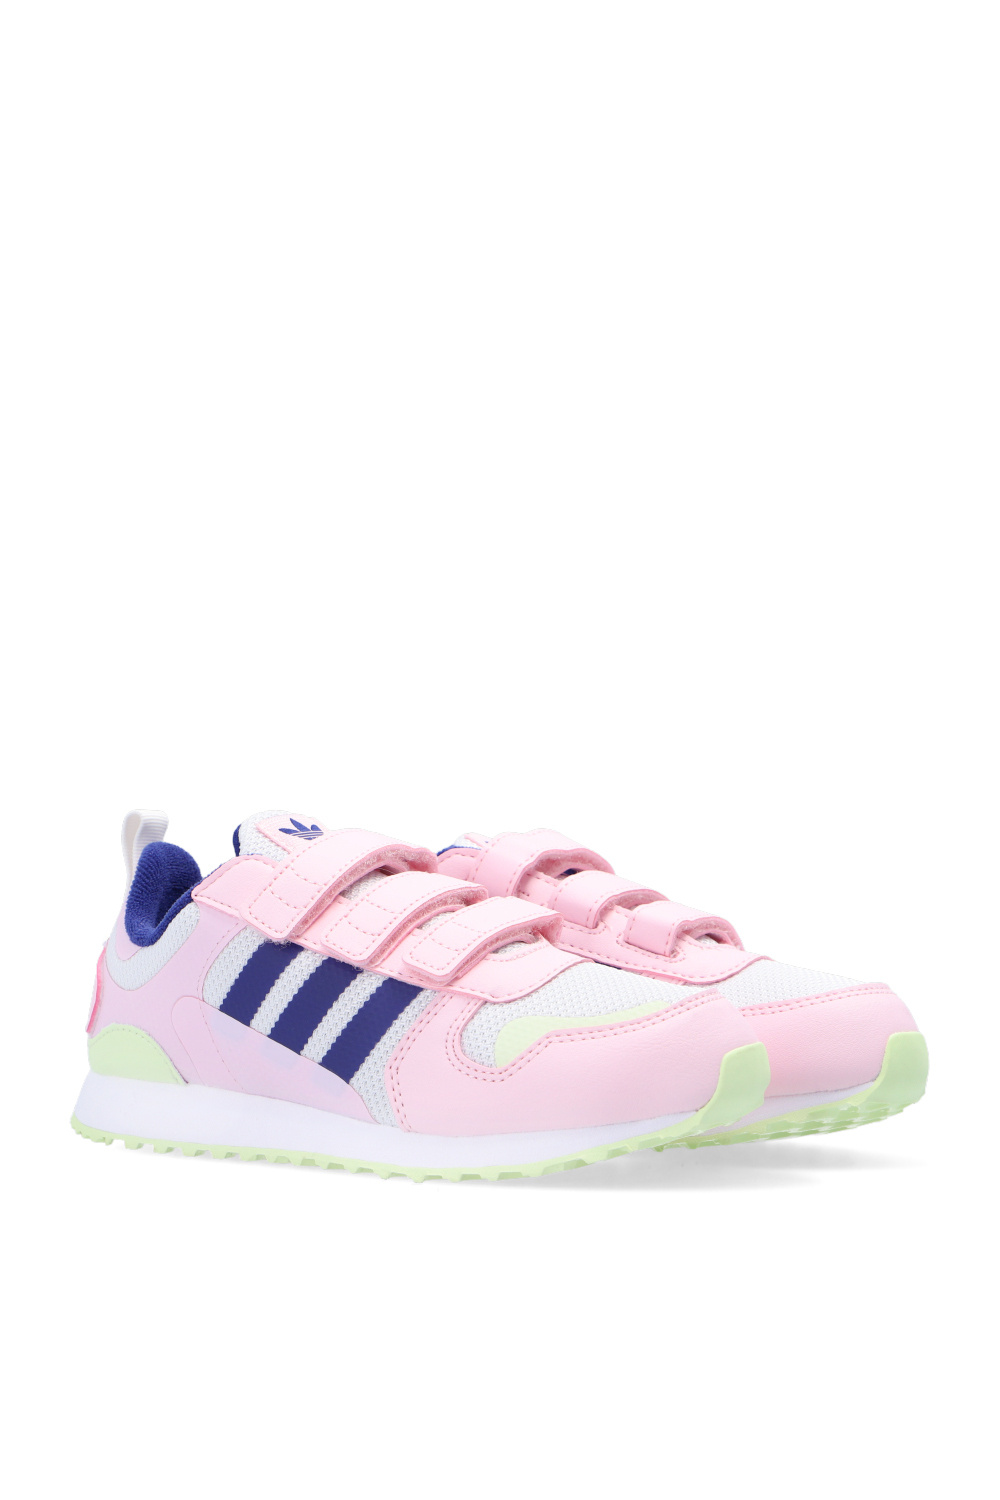 adidas search Kids ‘ZX 700’ sneakers